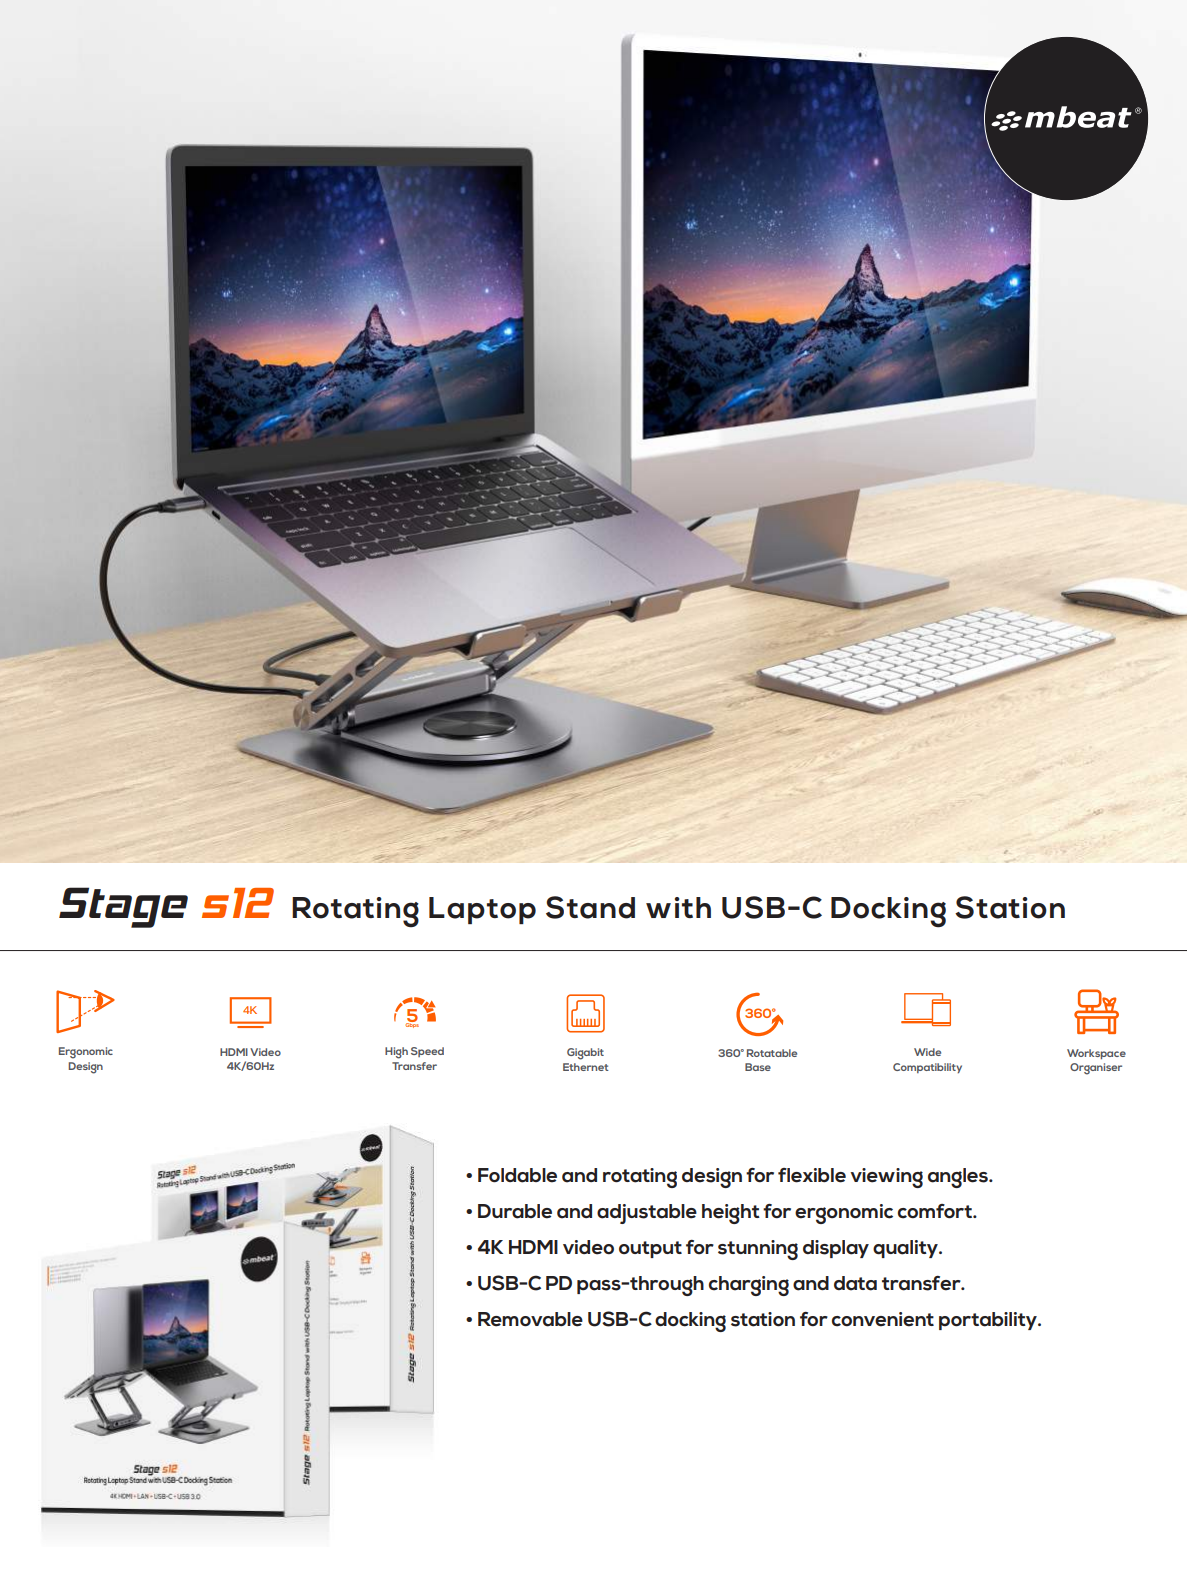 A large marketing image providing additional information about the product mBeat Stage S12 Rotating Laptop Stand with USB-C Docking Station - Additional alt info not provided